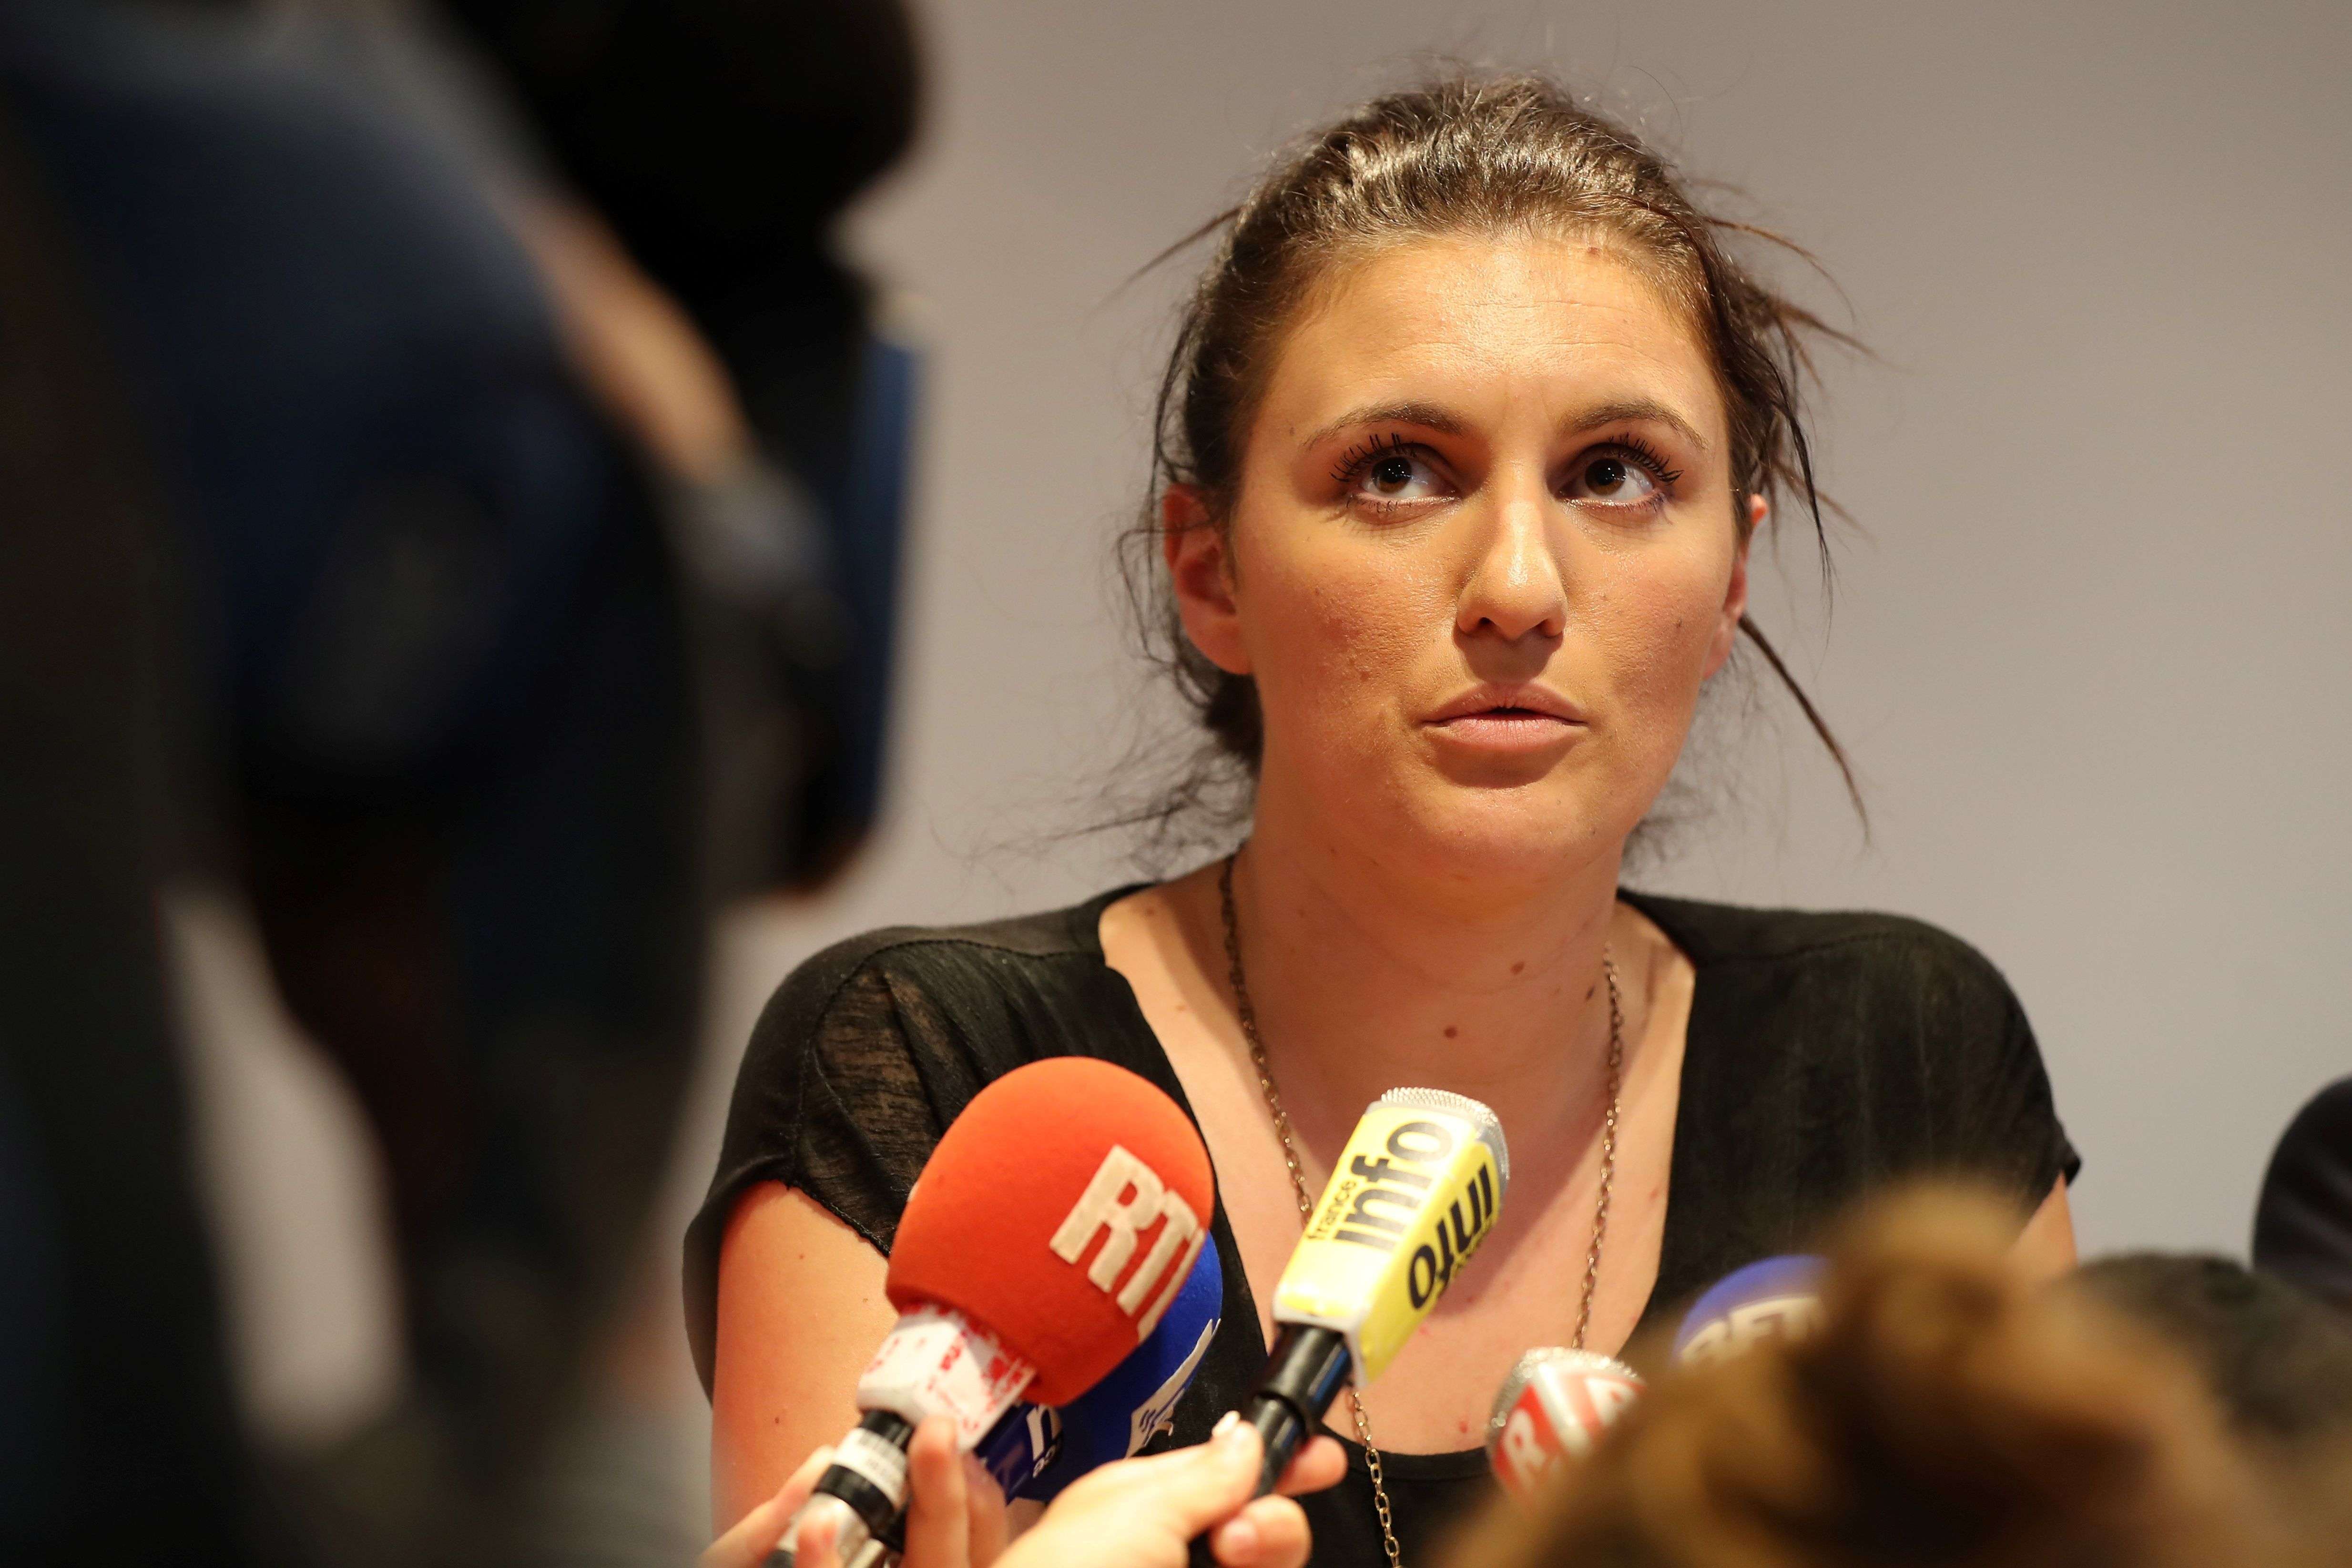 French policewoman Sandra Bertin gives a press conference on Sunday in Nice, accusing the French interior ministry of pressuring her to change her report on security on the night of the Bastille Day truck attack. Photo: AFP